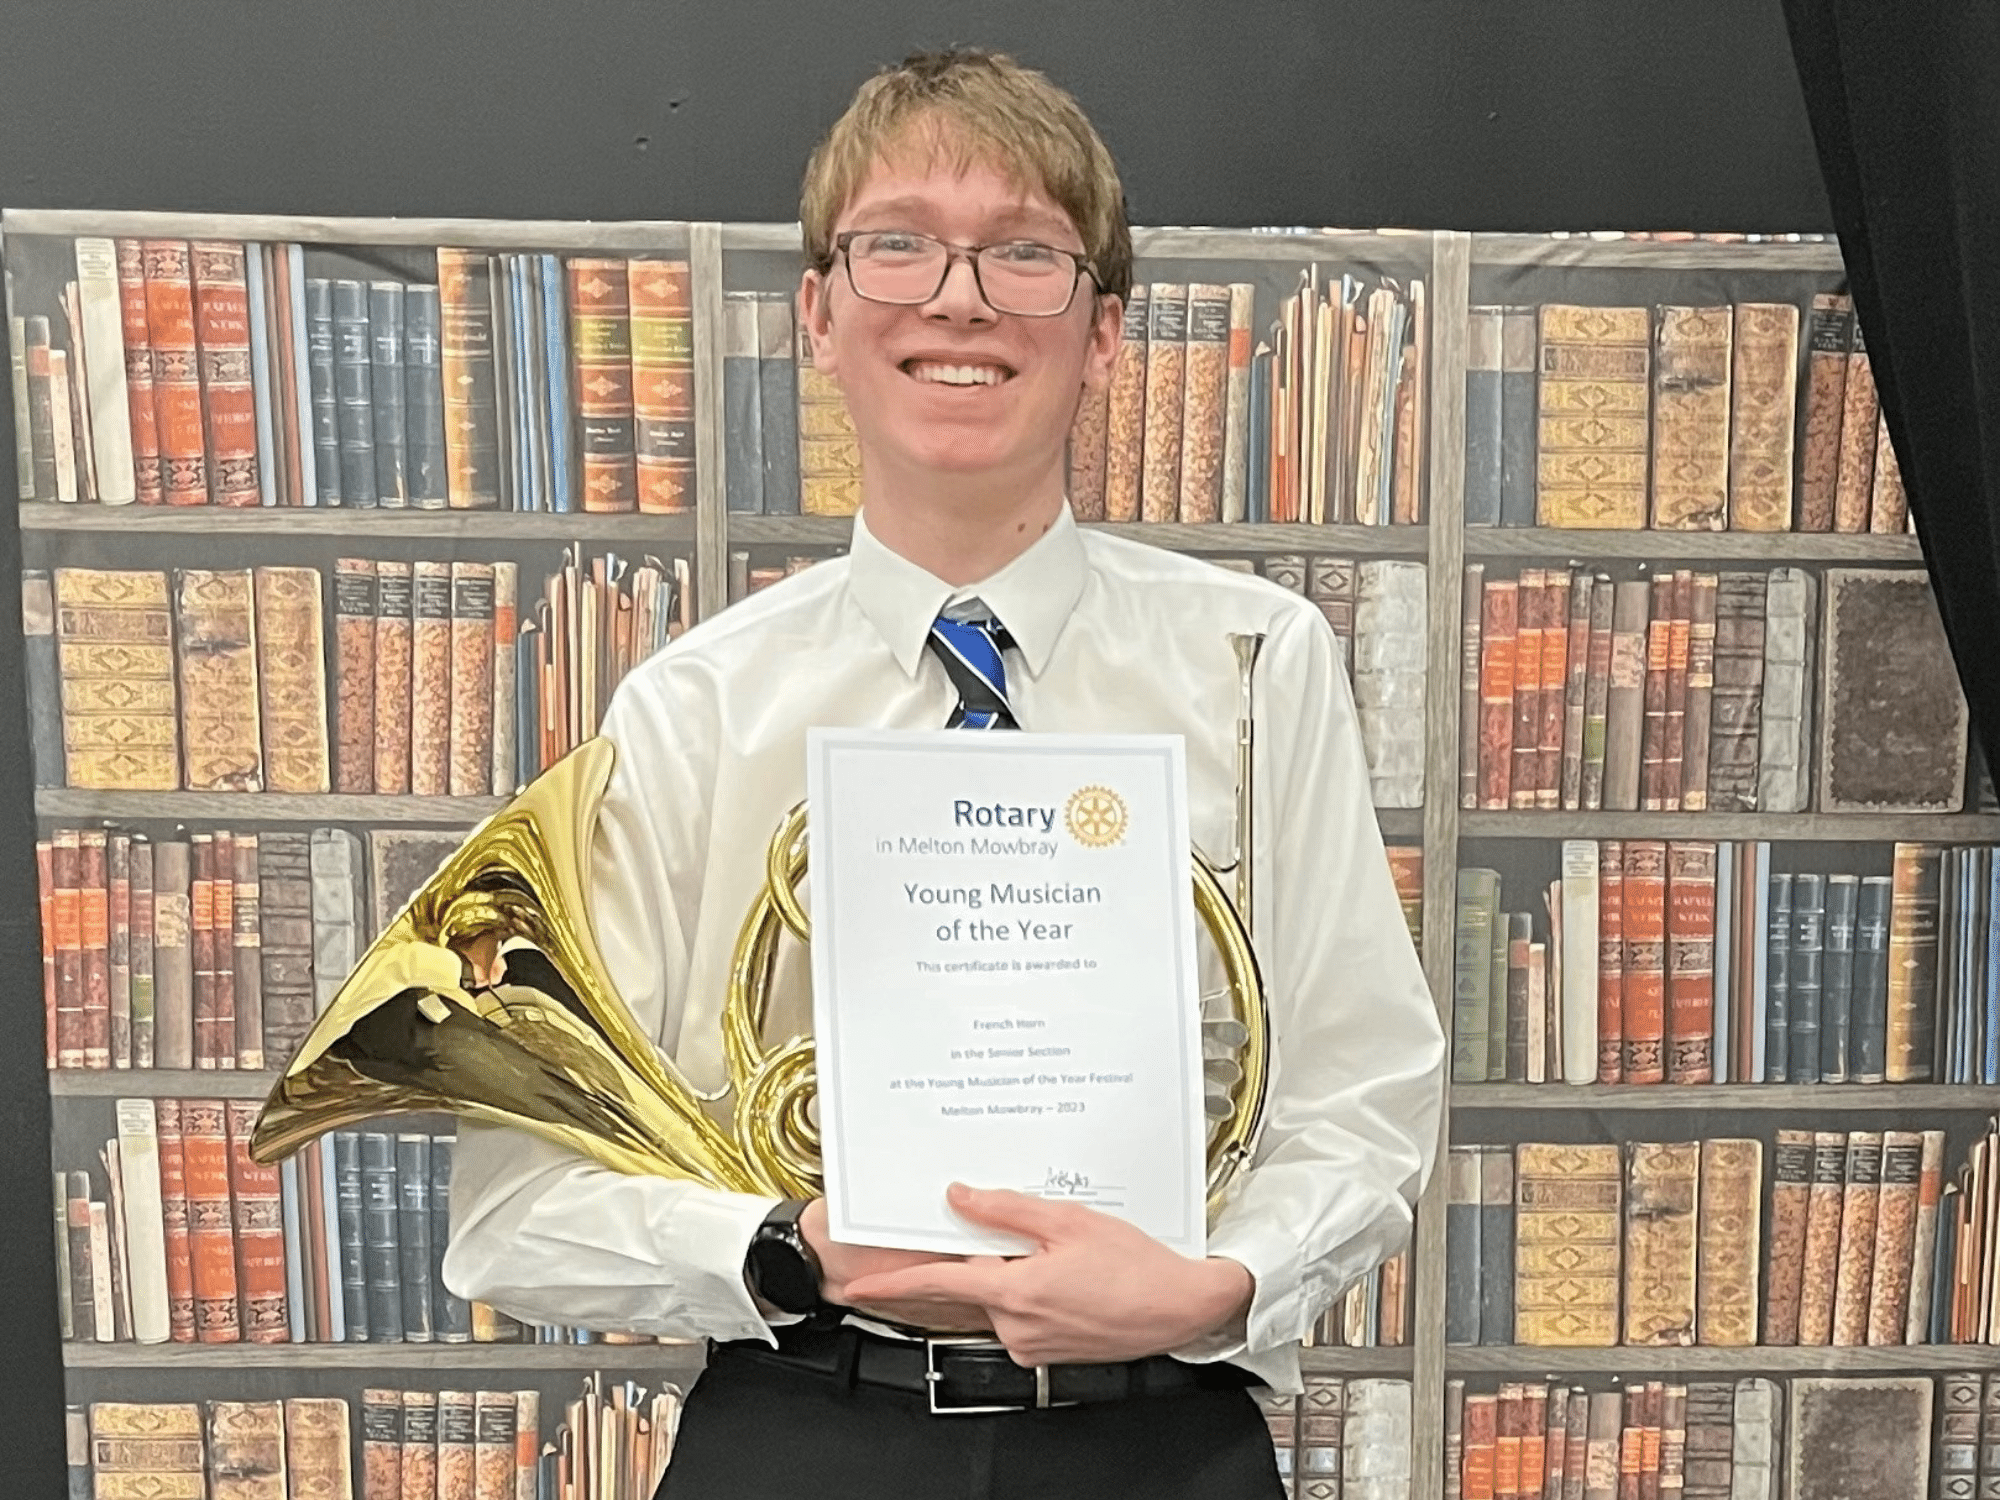 Student holds certificate for French horn performance